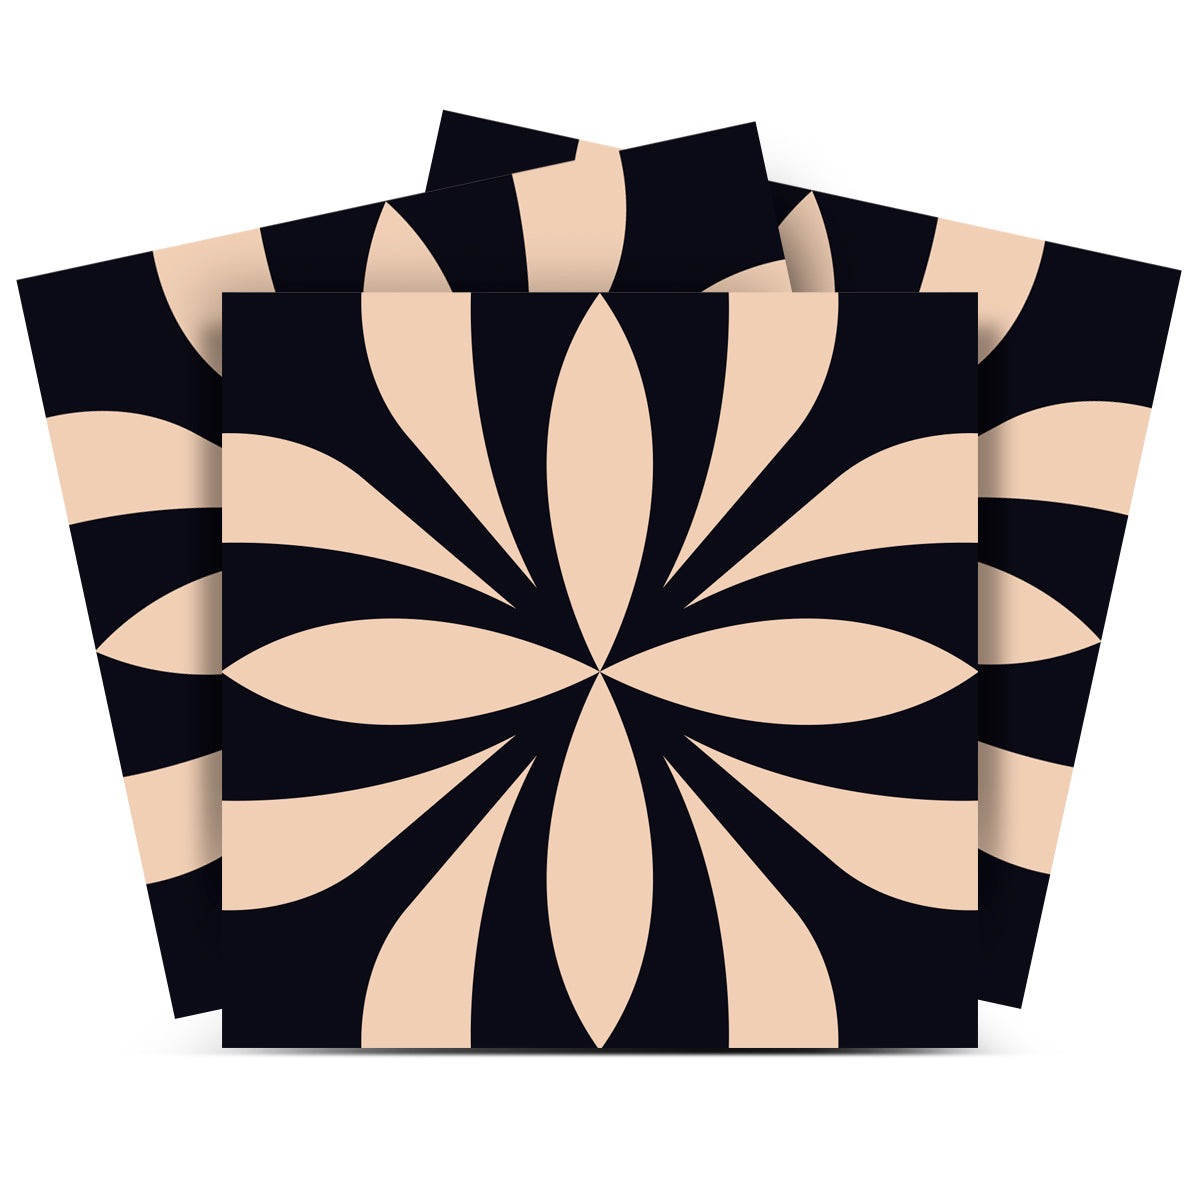 6" X 6" Intertwined Black And Cream Peel And Stick Removable Tiles-390770-1